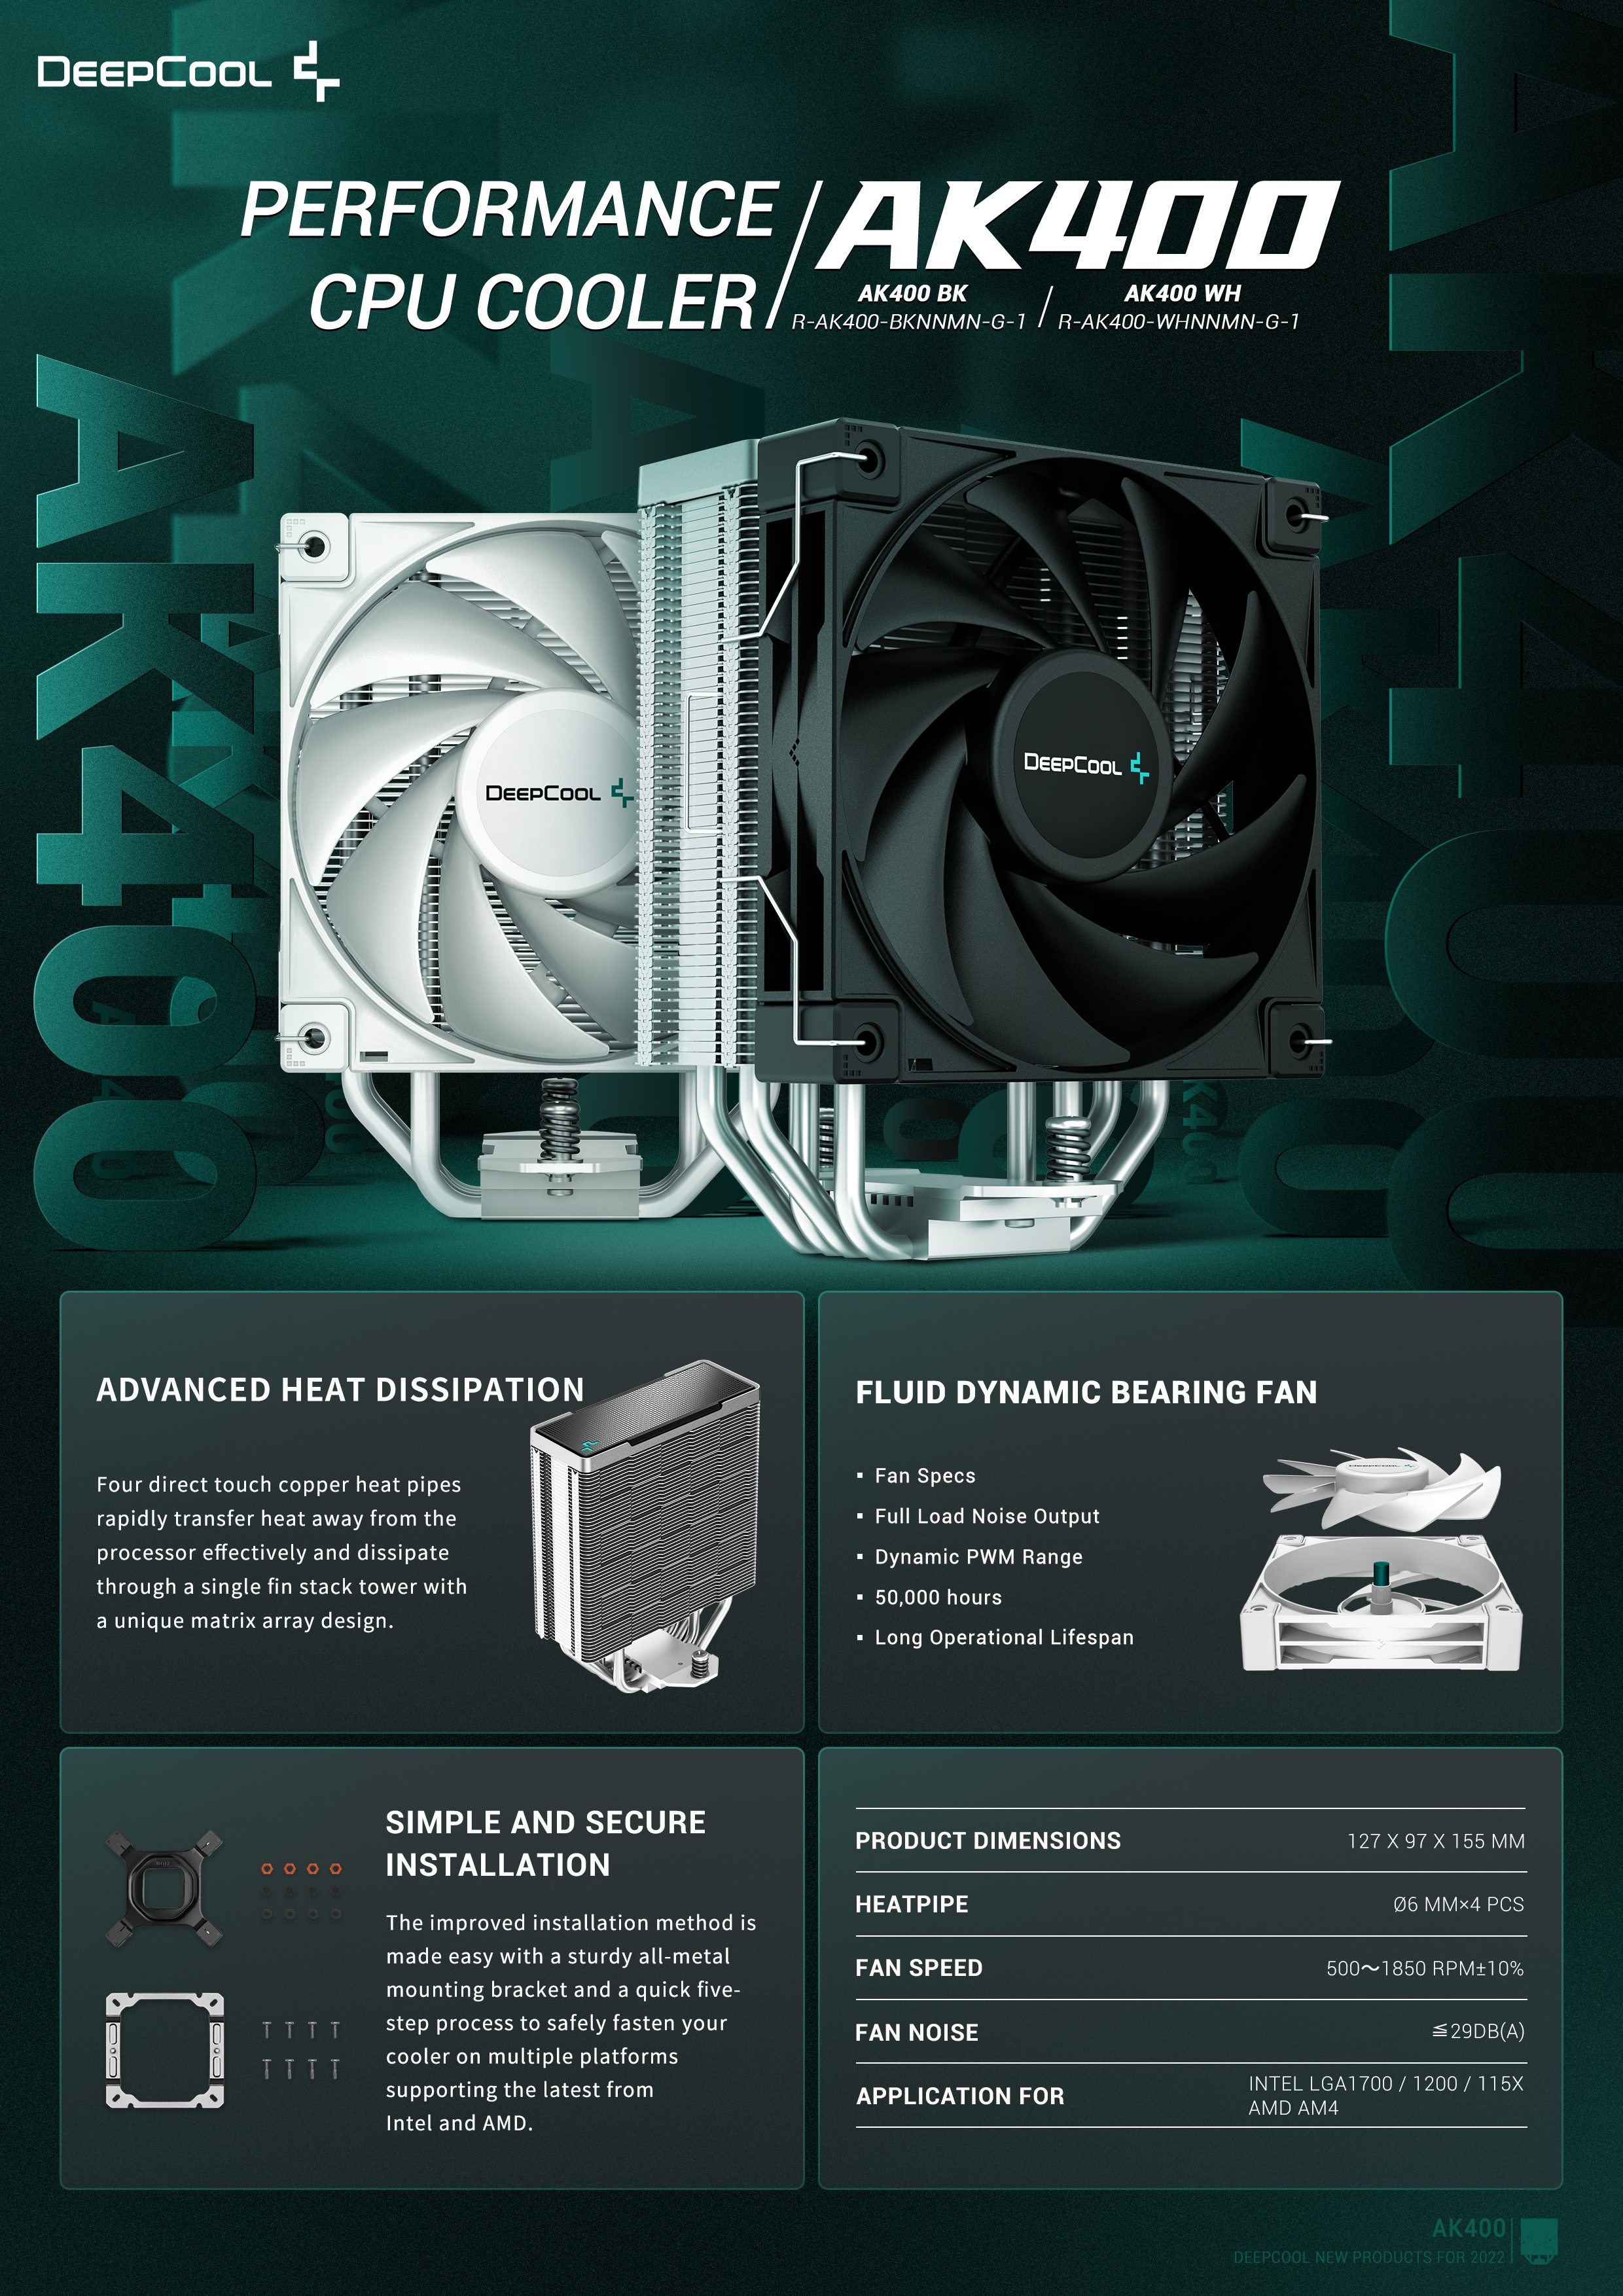 A large marketing image providing additional information about the product DeepCool AK400 CPU Cooler - Additional alt info not provided